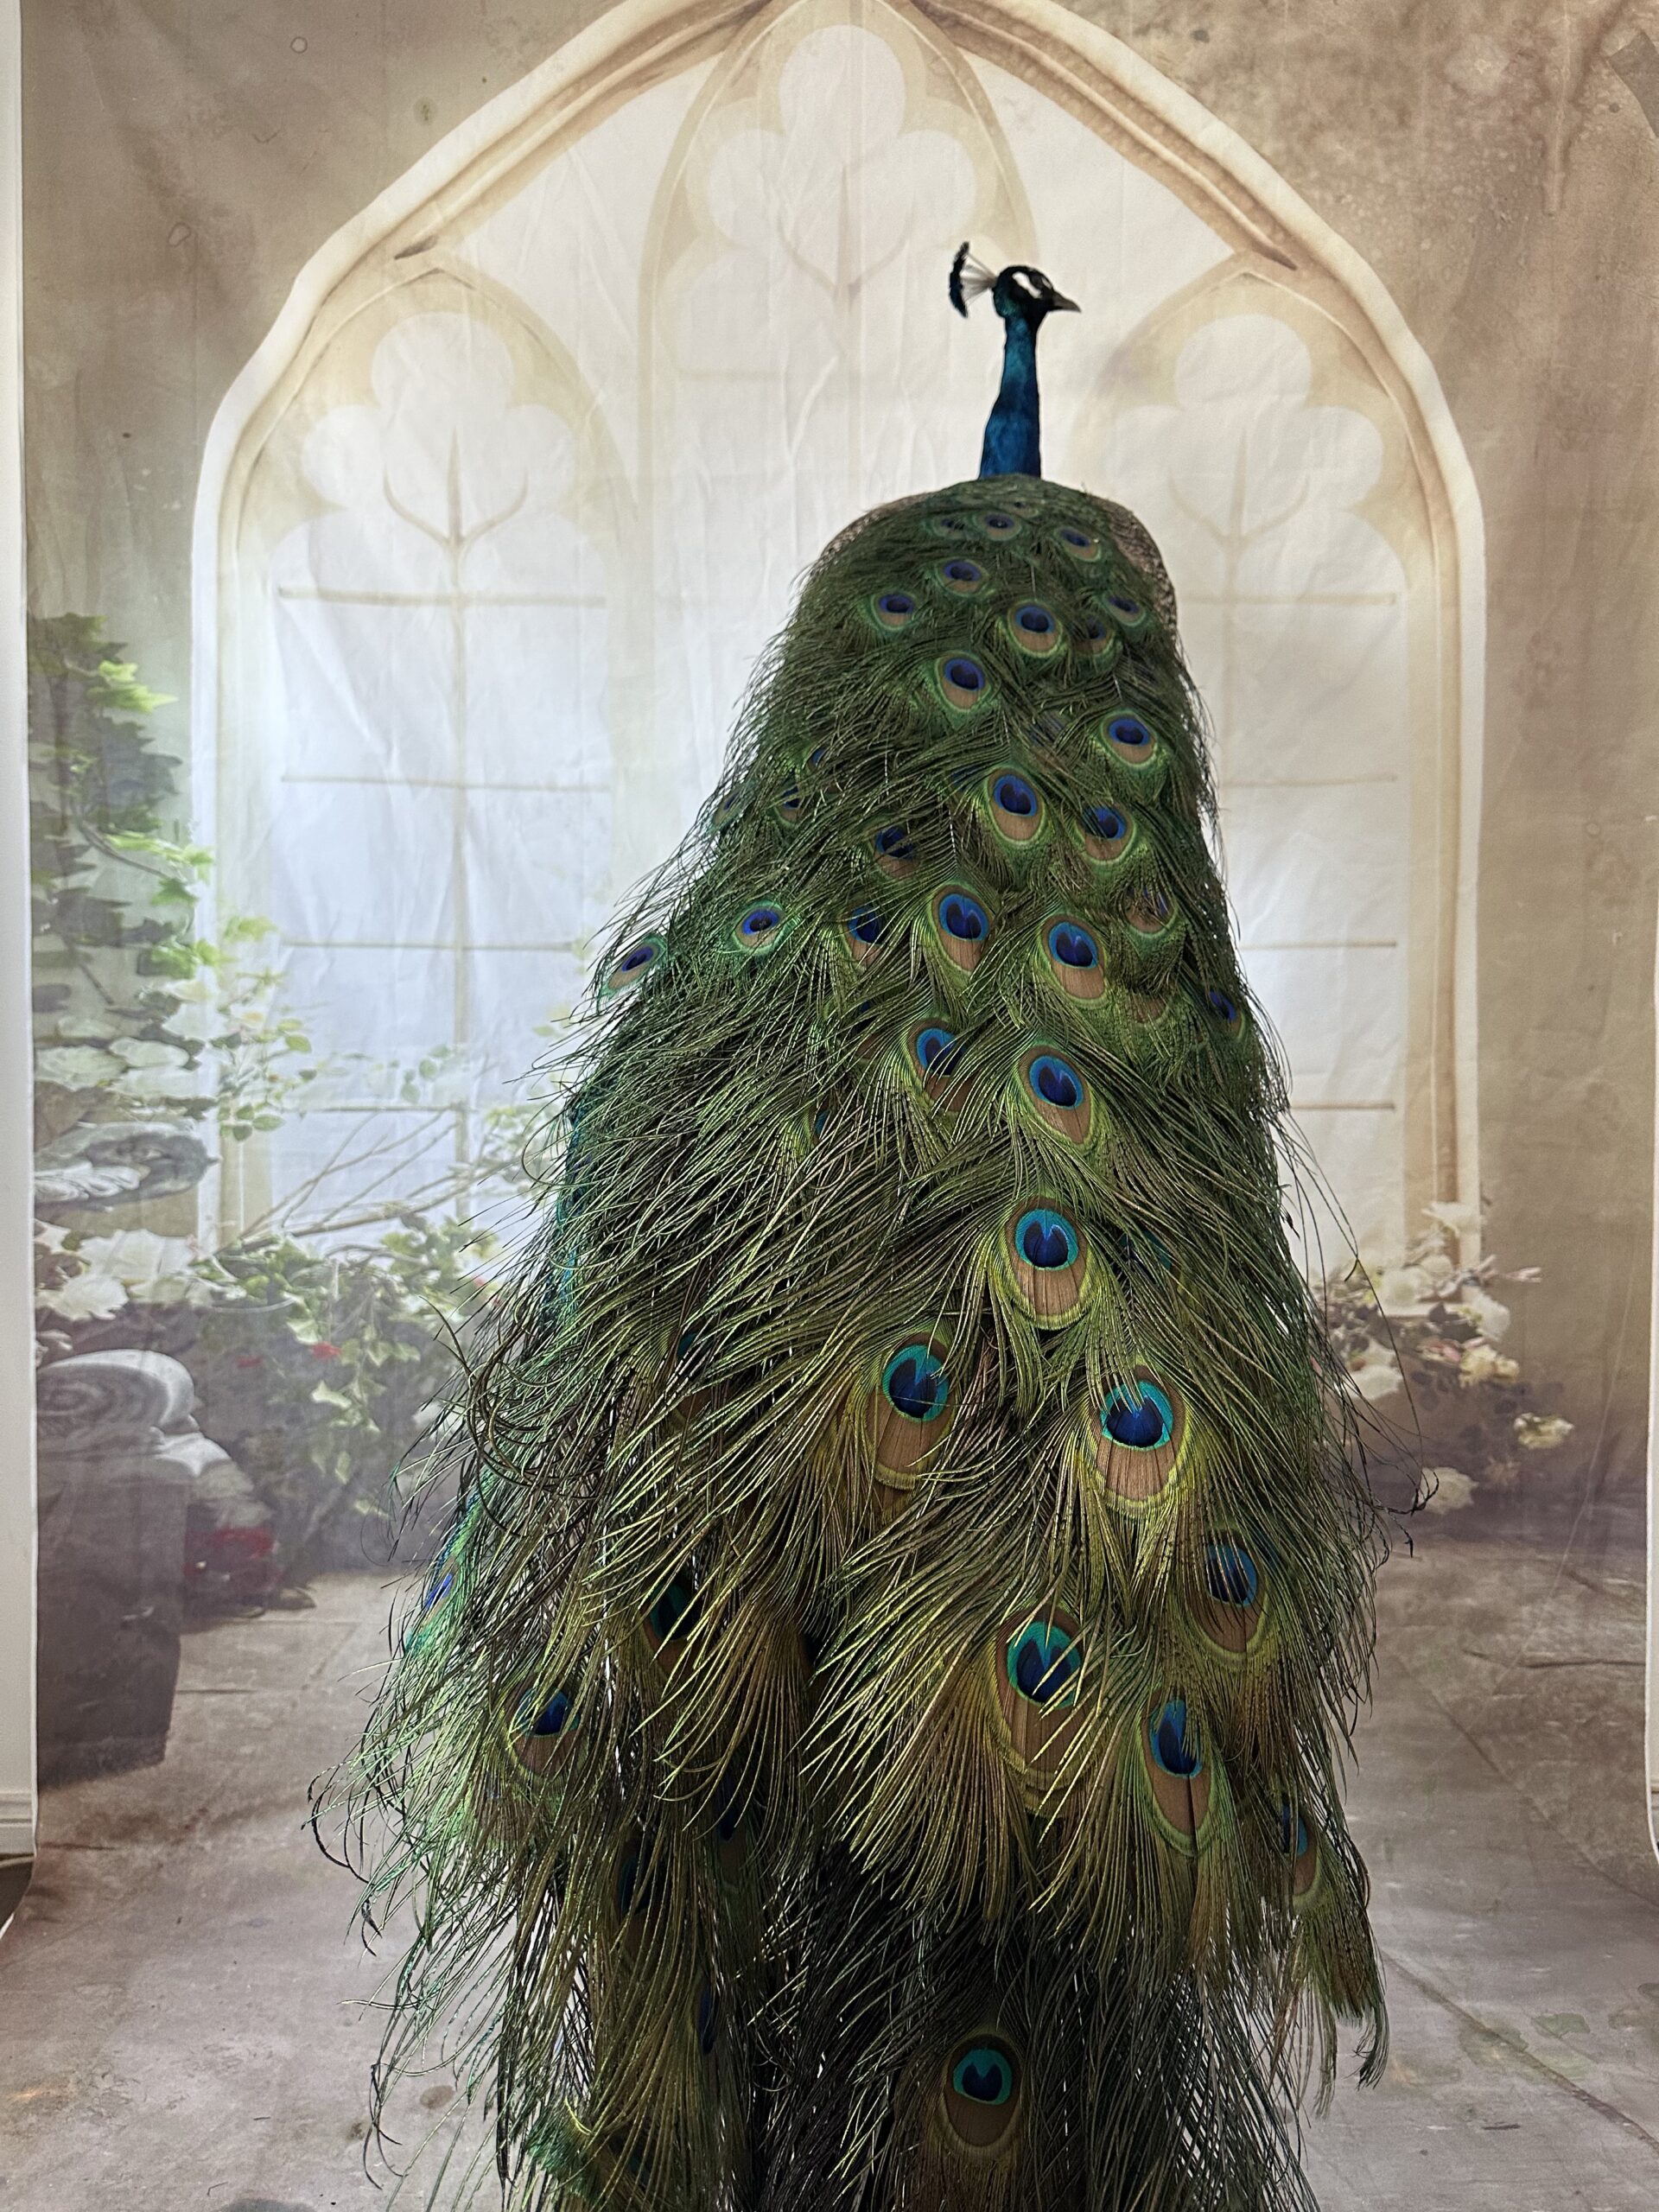 back of peacock displaying feather train